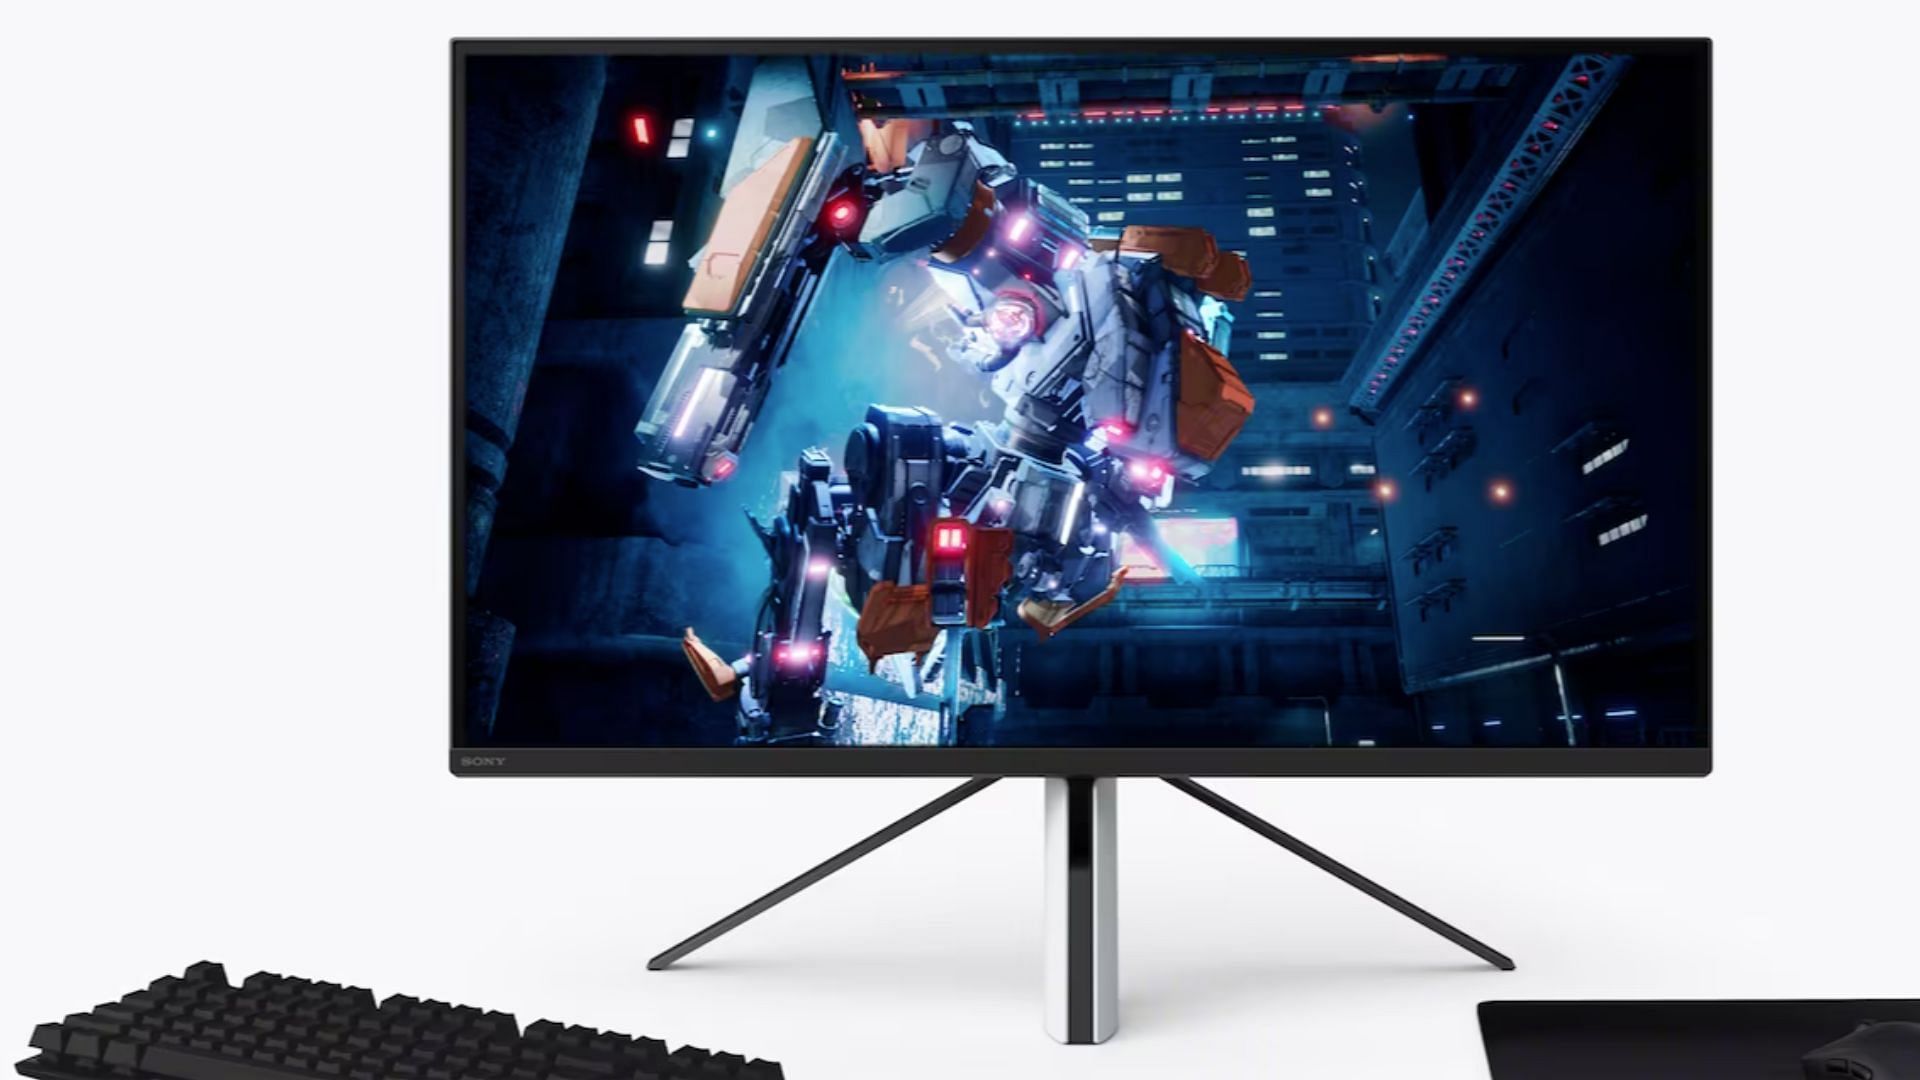 24-inch monitors allow you to see the entirety of the screen with a single glance (Image via Sony)